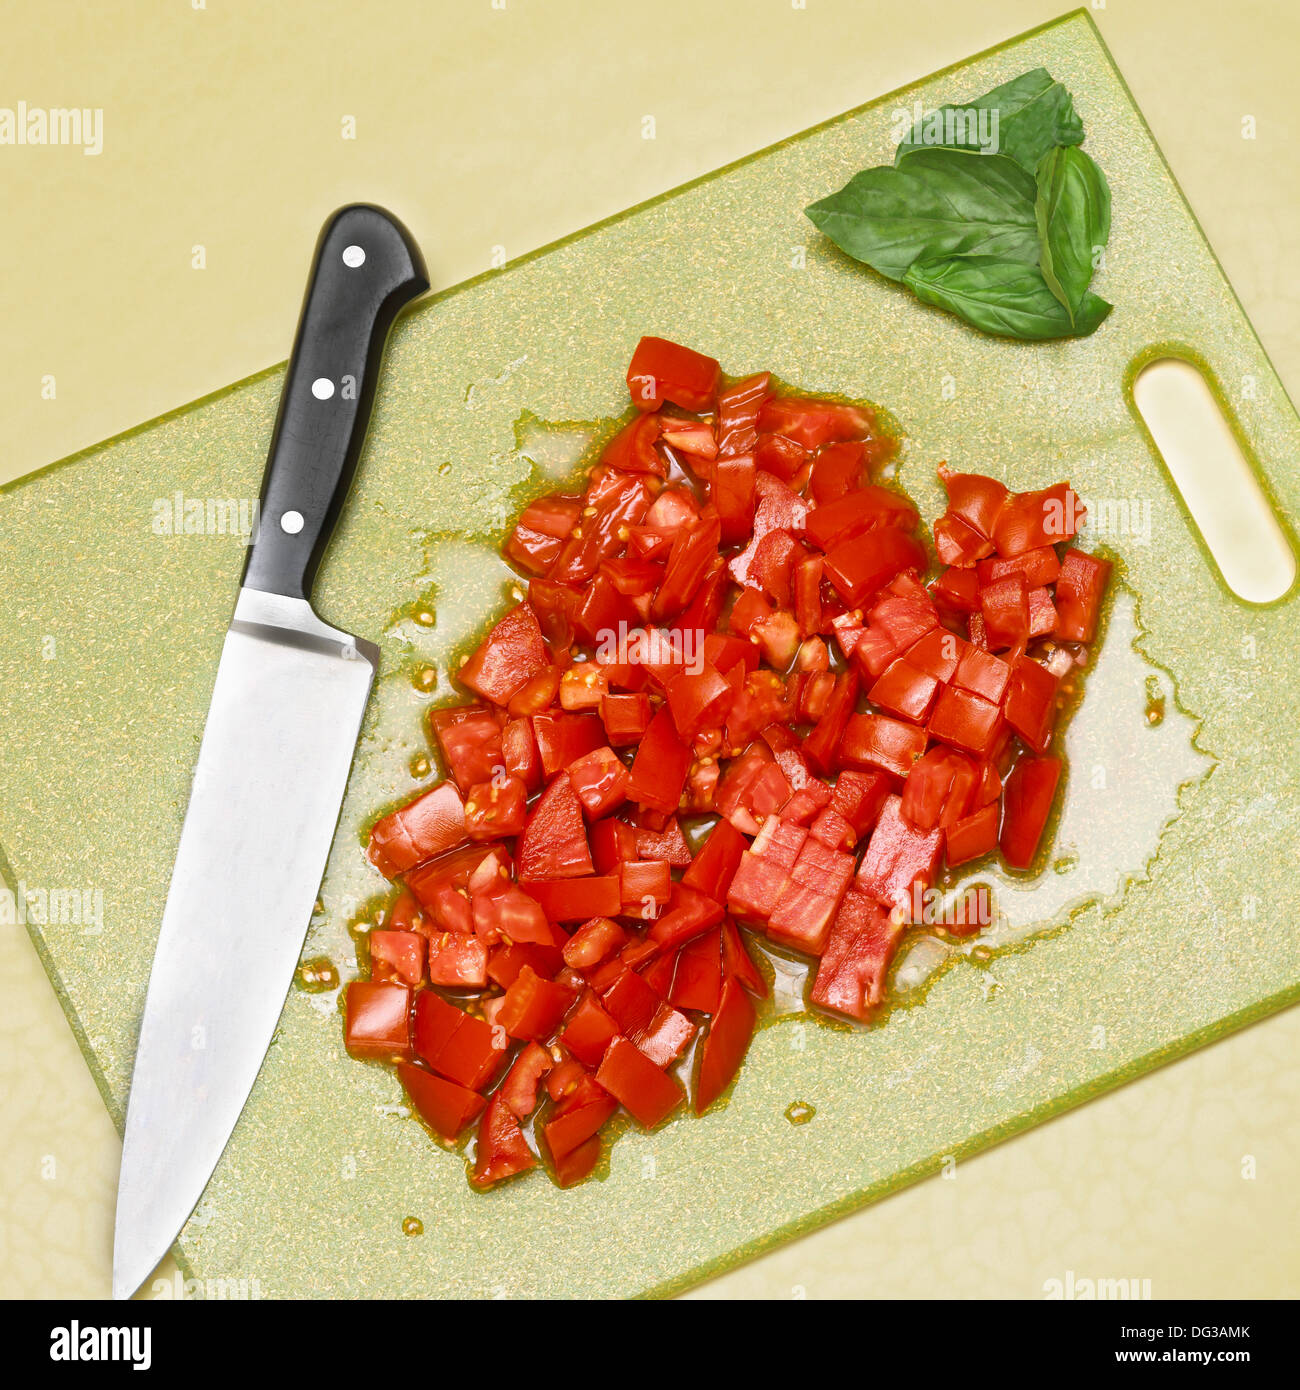 Diced Tomatoes with Basil and Sharp Knife on Cutting Board, High Angle View Stock Photo